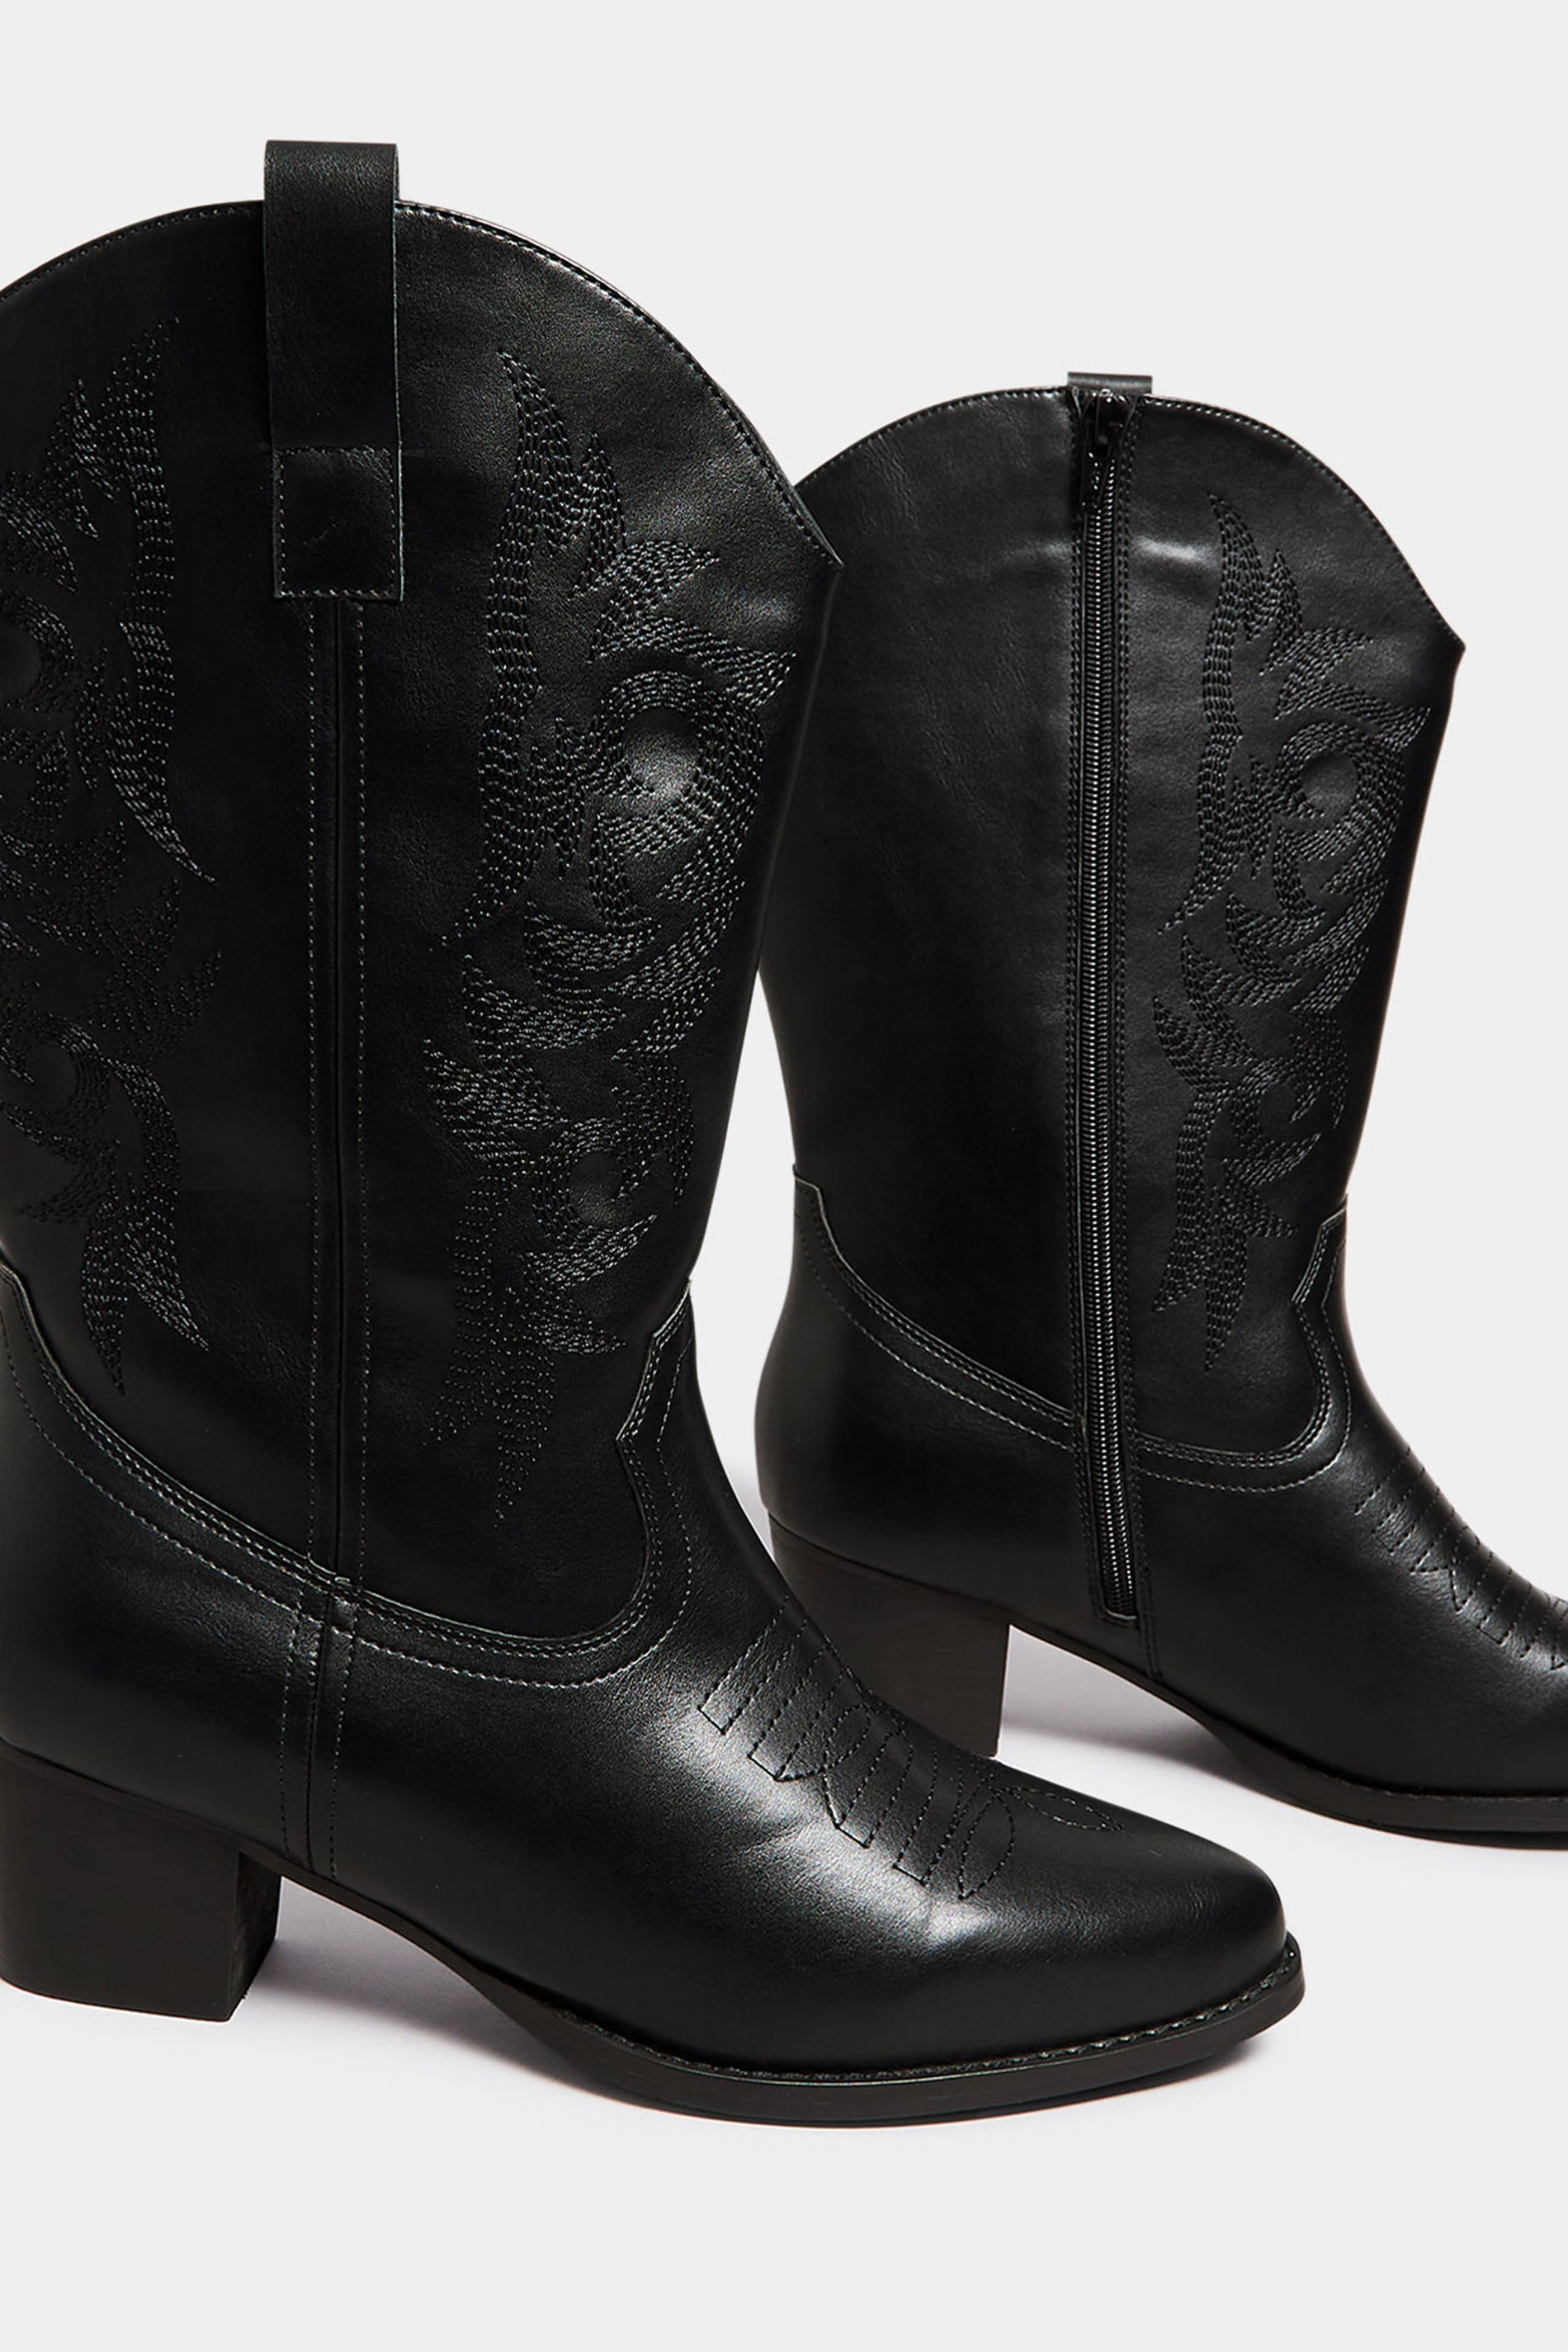 LIMITED COLLECTION Black Cowboy Boots in Extra Wide EEE Fit | Yours ...